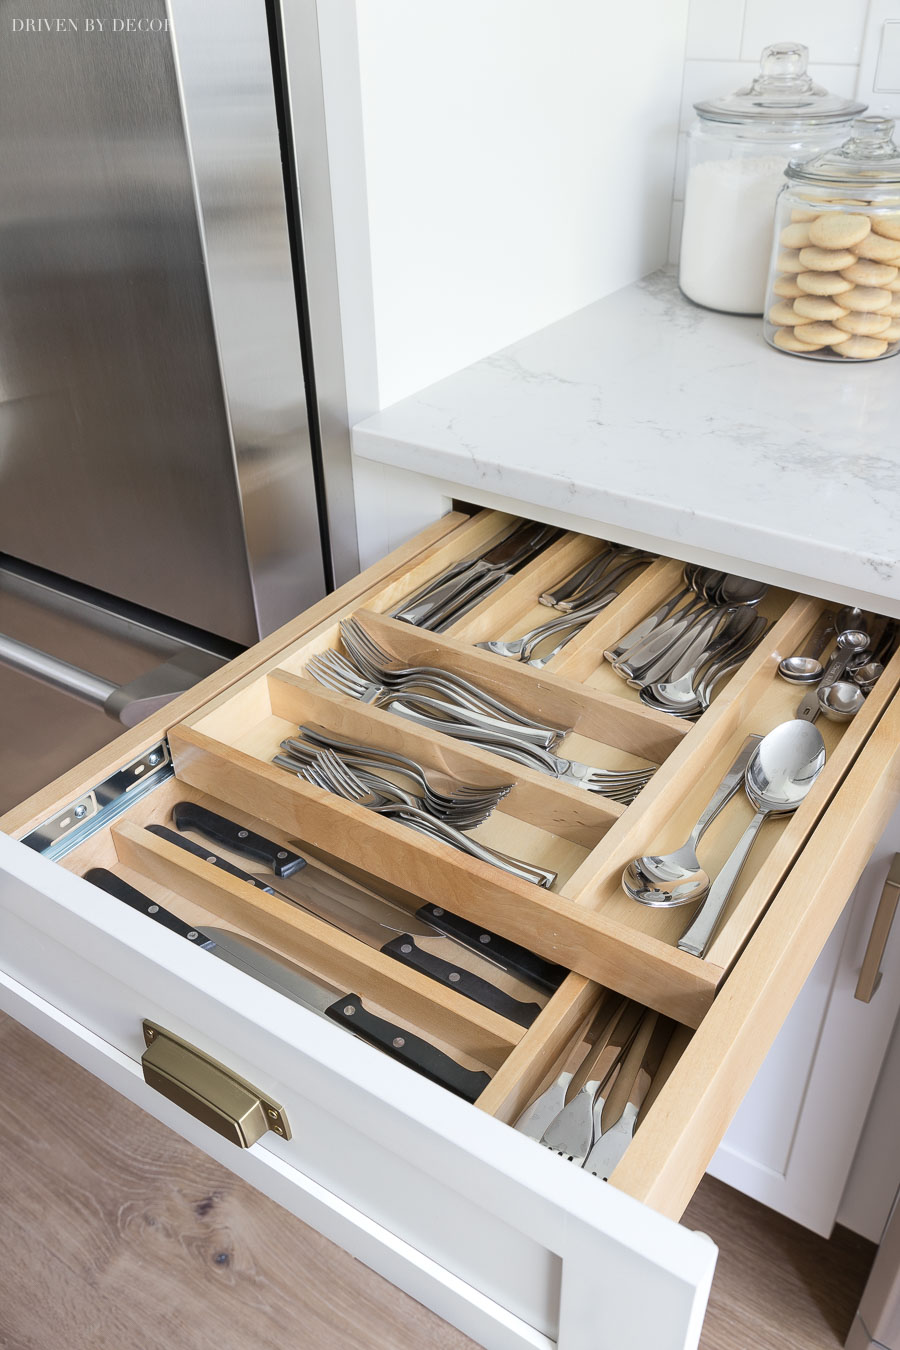 https://www.drivenbydecor.com/wp-content/uploads/2018/08/kitchen-cabinet-two-tier-cutlery-silverware-divided-drawer.jpg